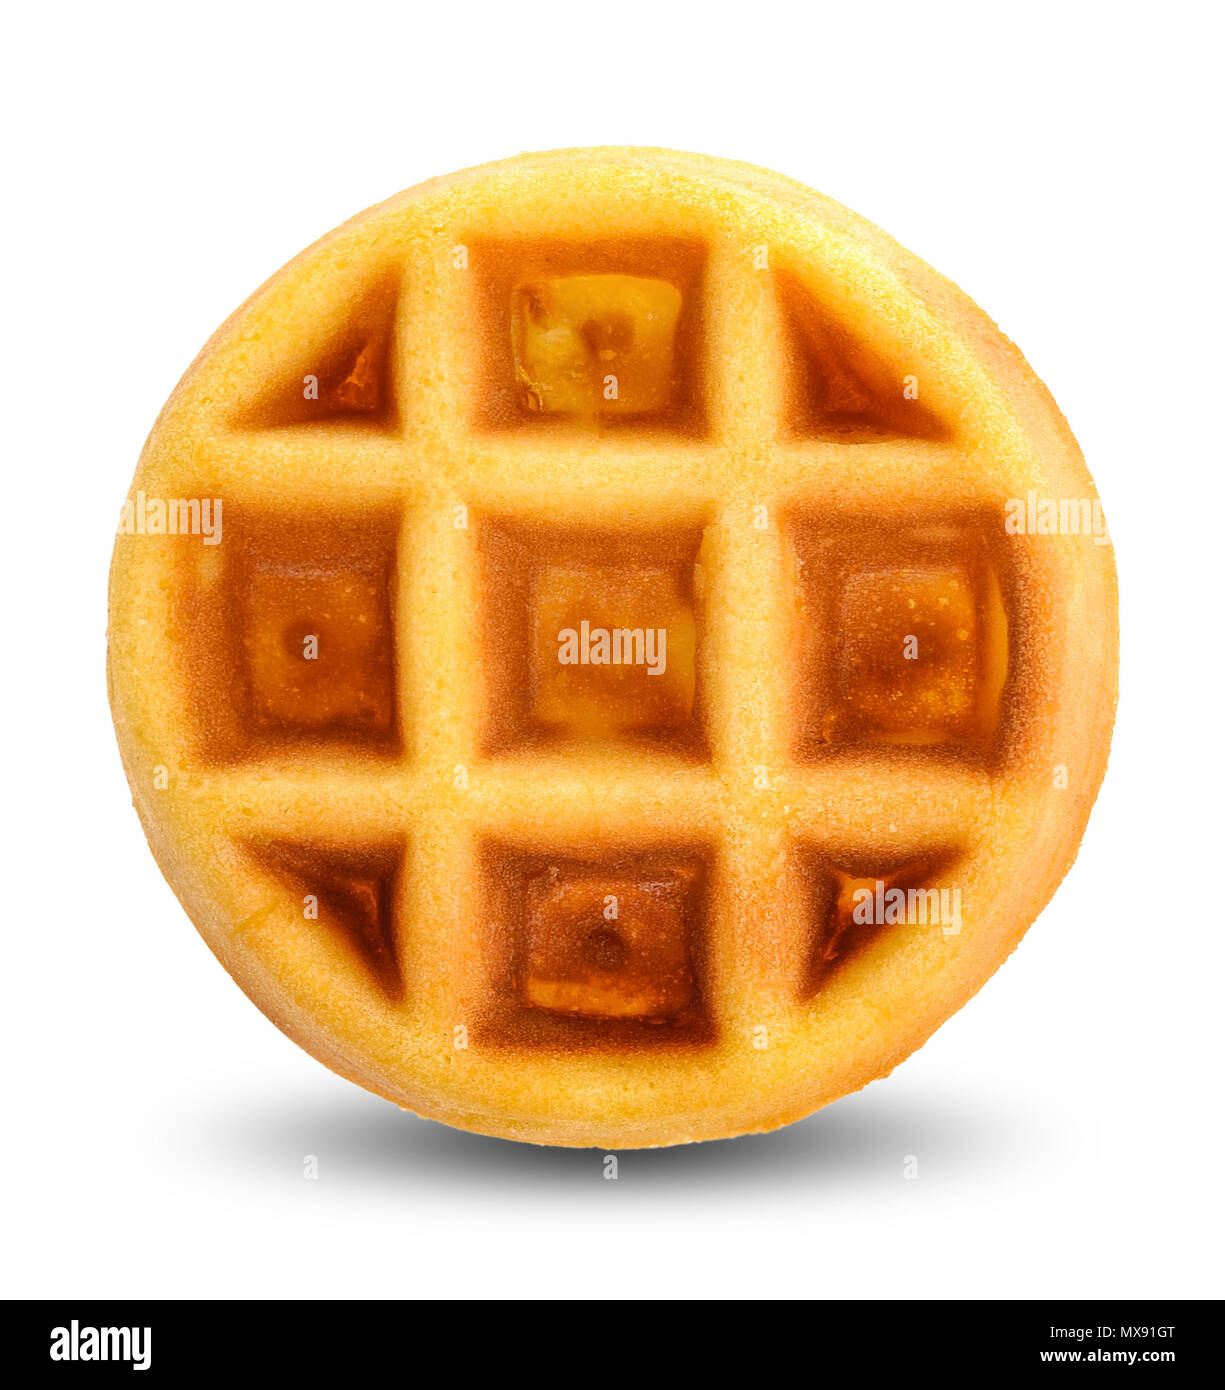 https://c8.alamy.com/comp/MX91GT/round-waffle-isolated-on-the-white-background-MX91GT.jpg